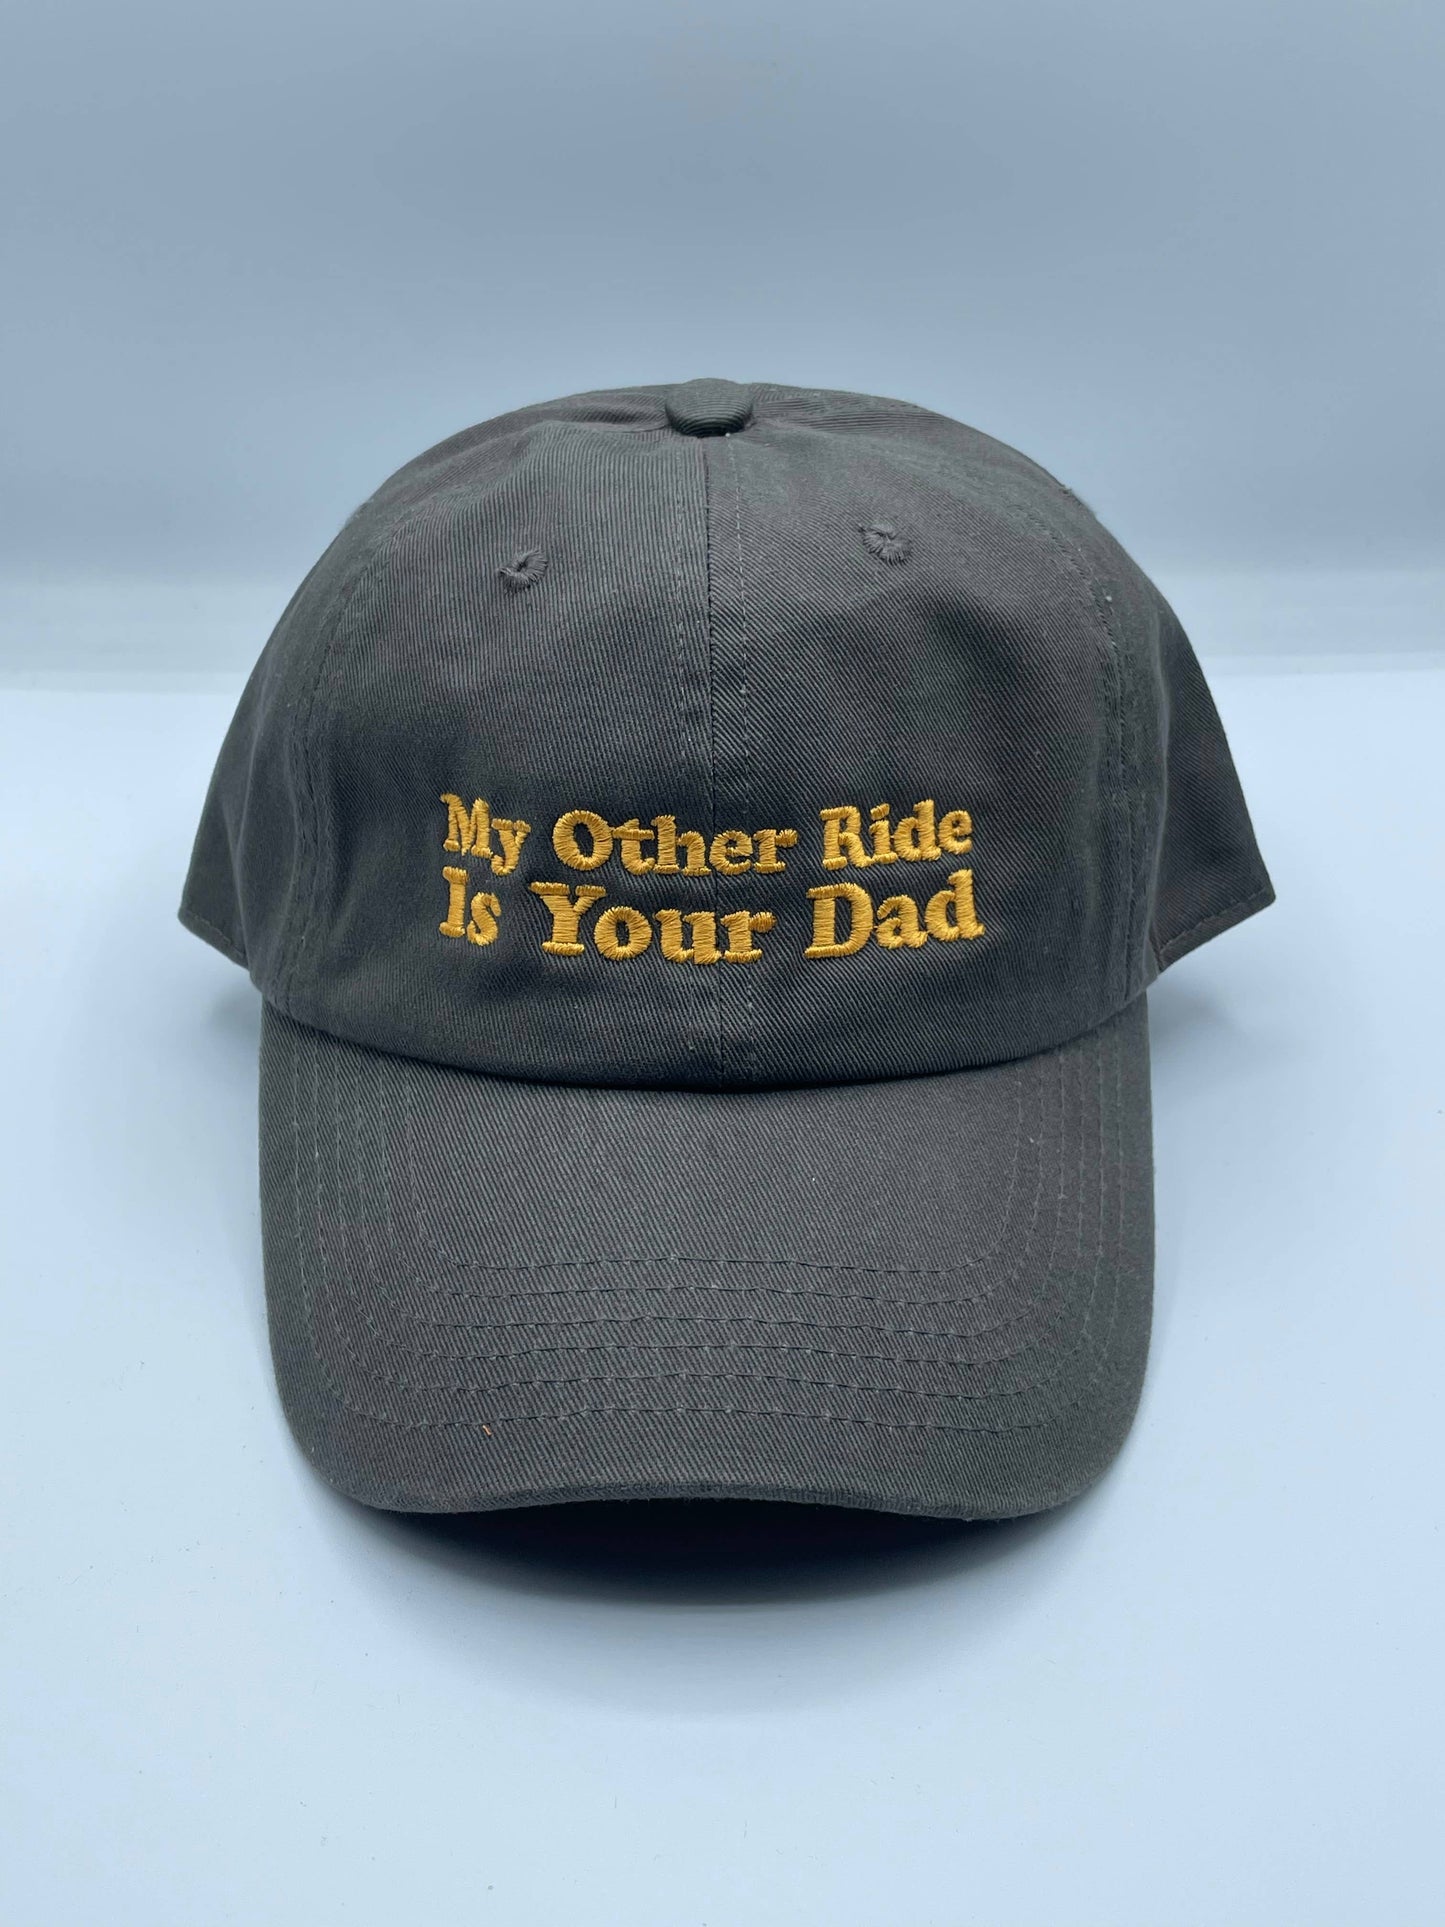 My Other Ride Is Your Dad Baseball Hat